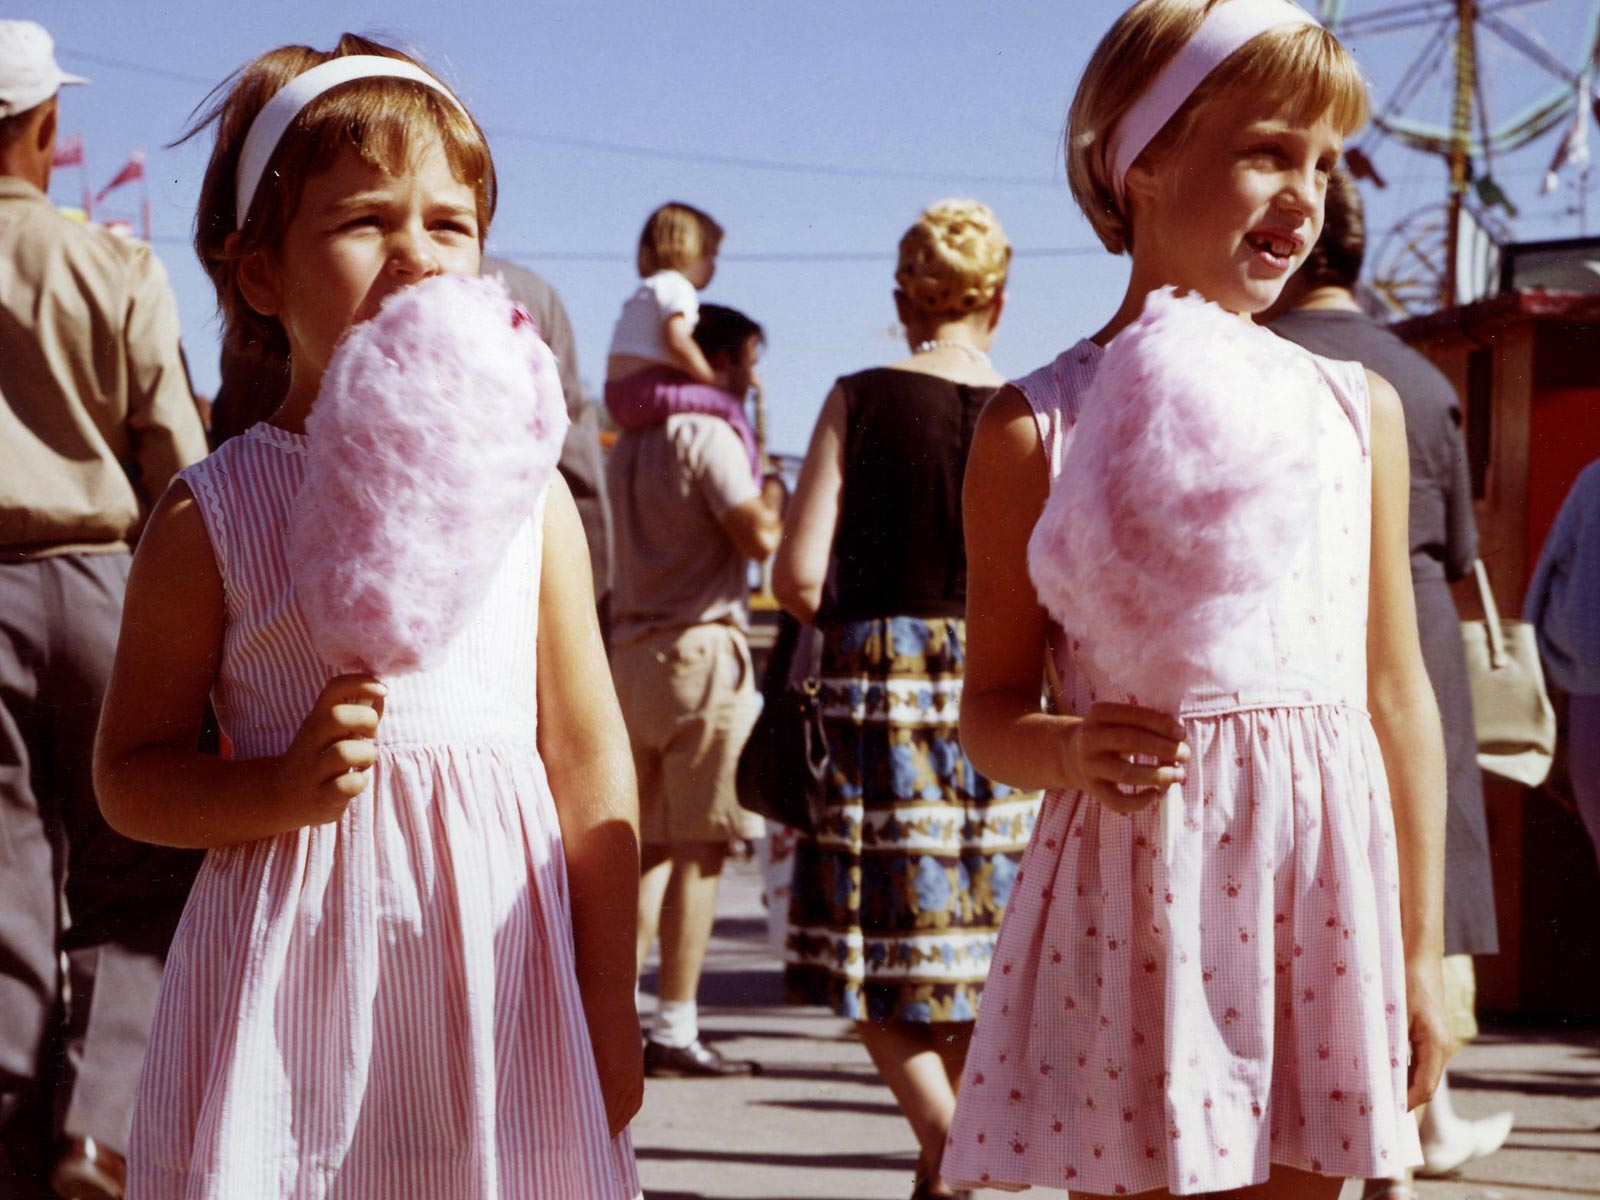 Two young girls at the fair with cotton candy